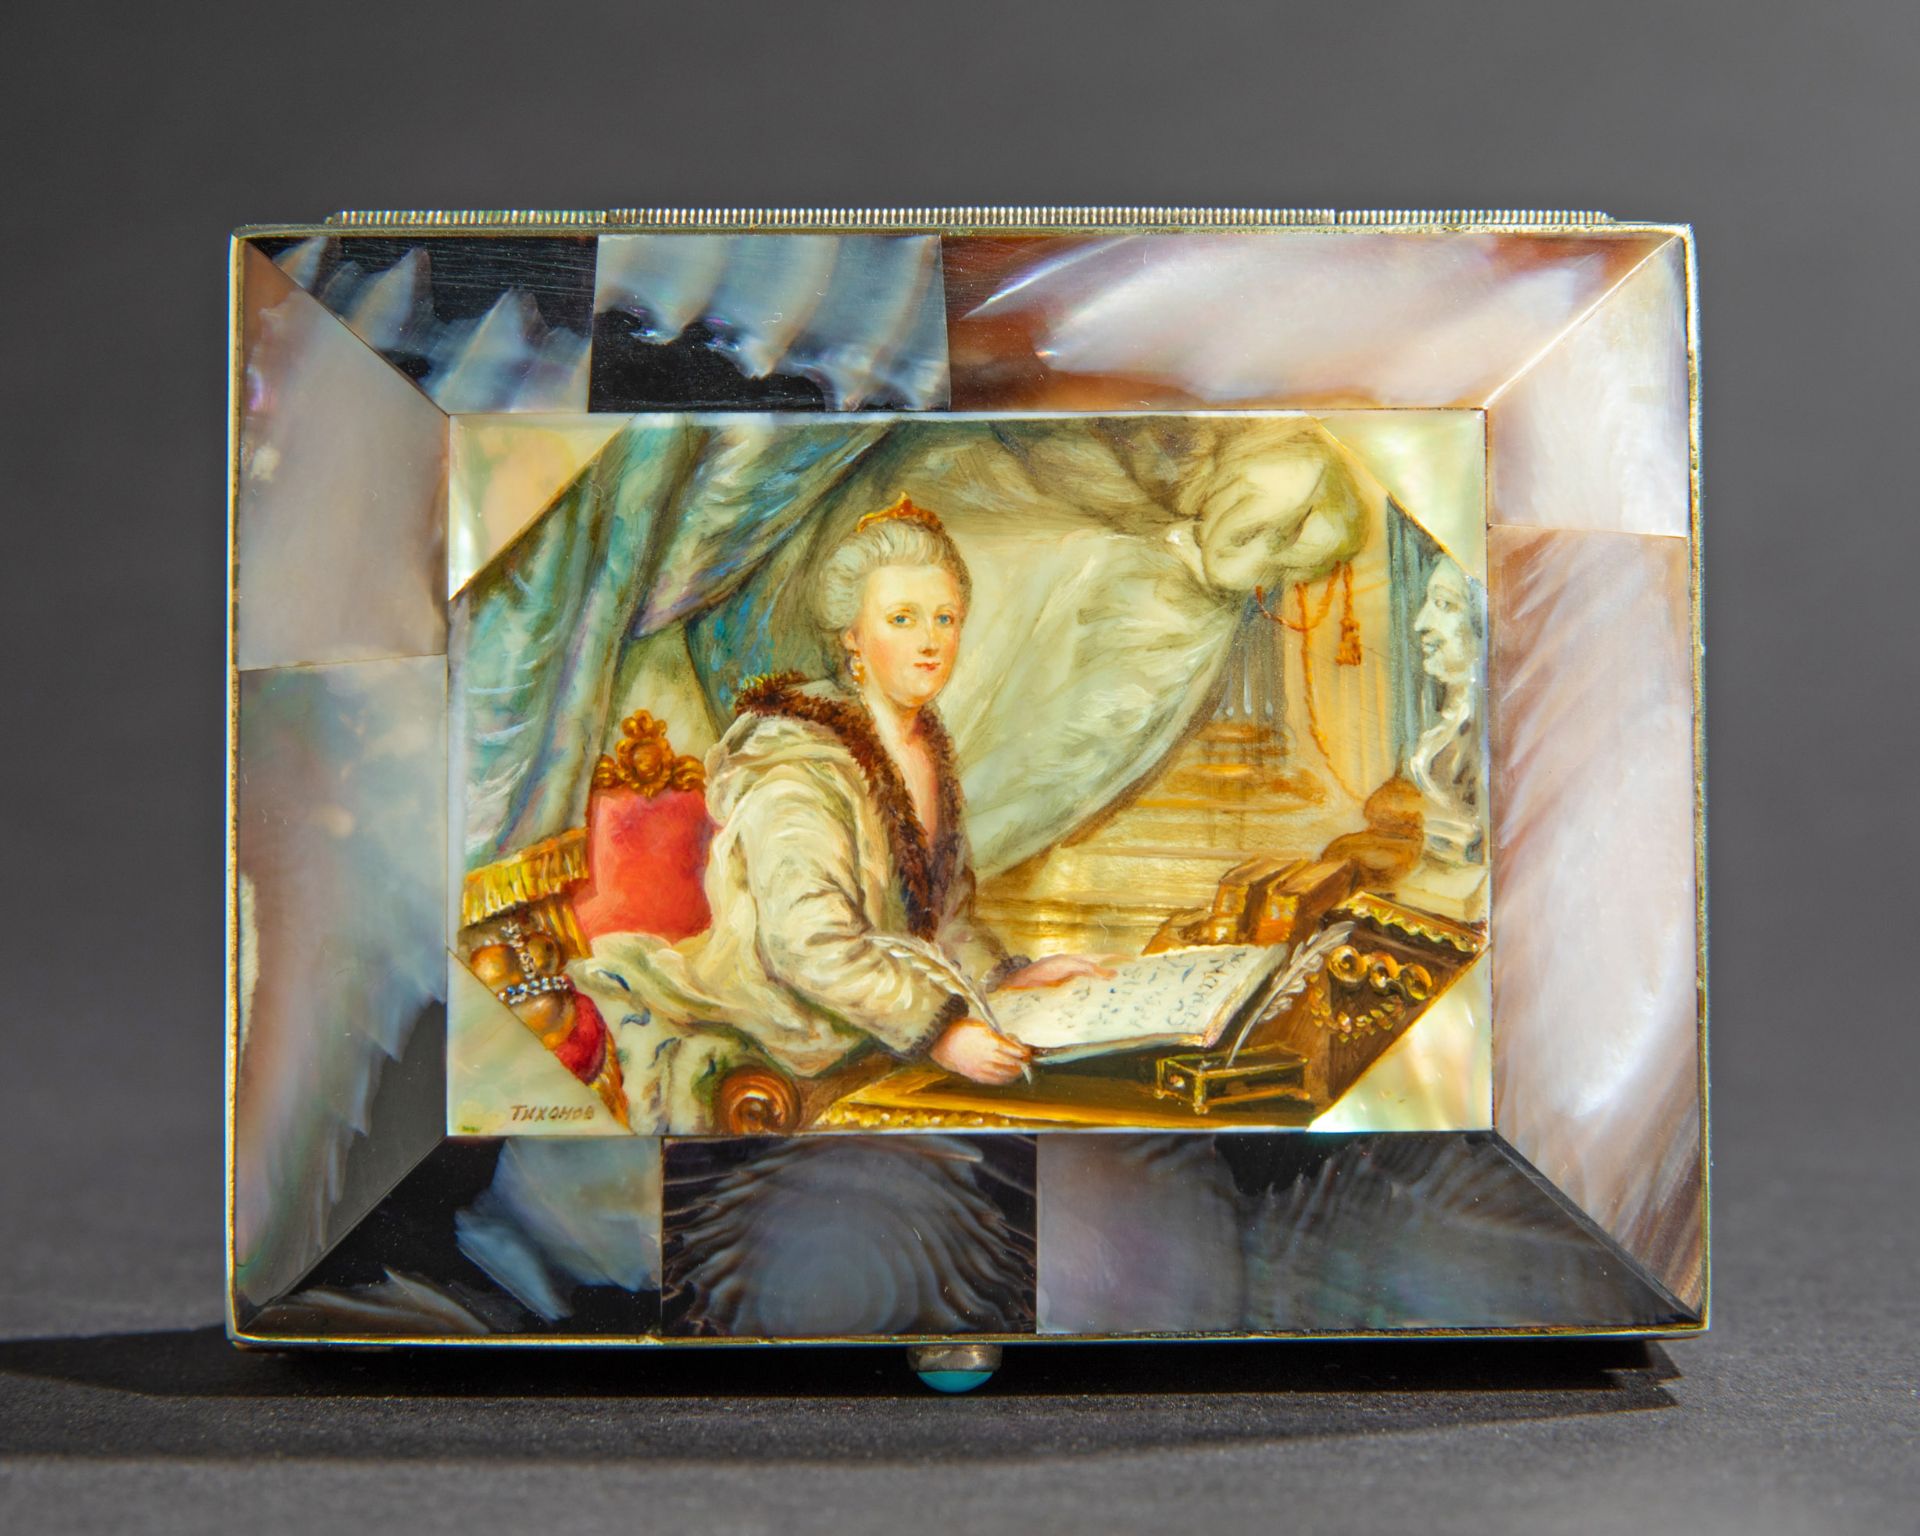 Decorative box, Russia, TIHANOW, Catherine the Great instructing the constitution - Image 2 of 5